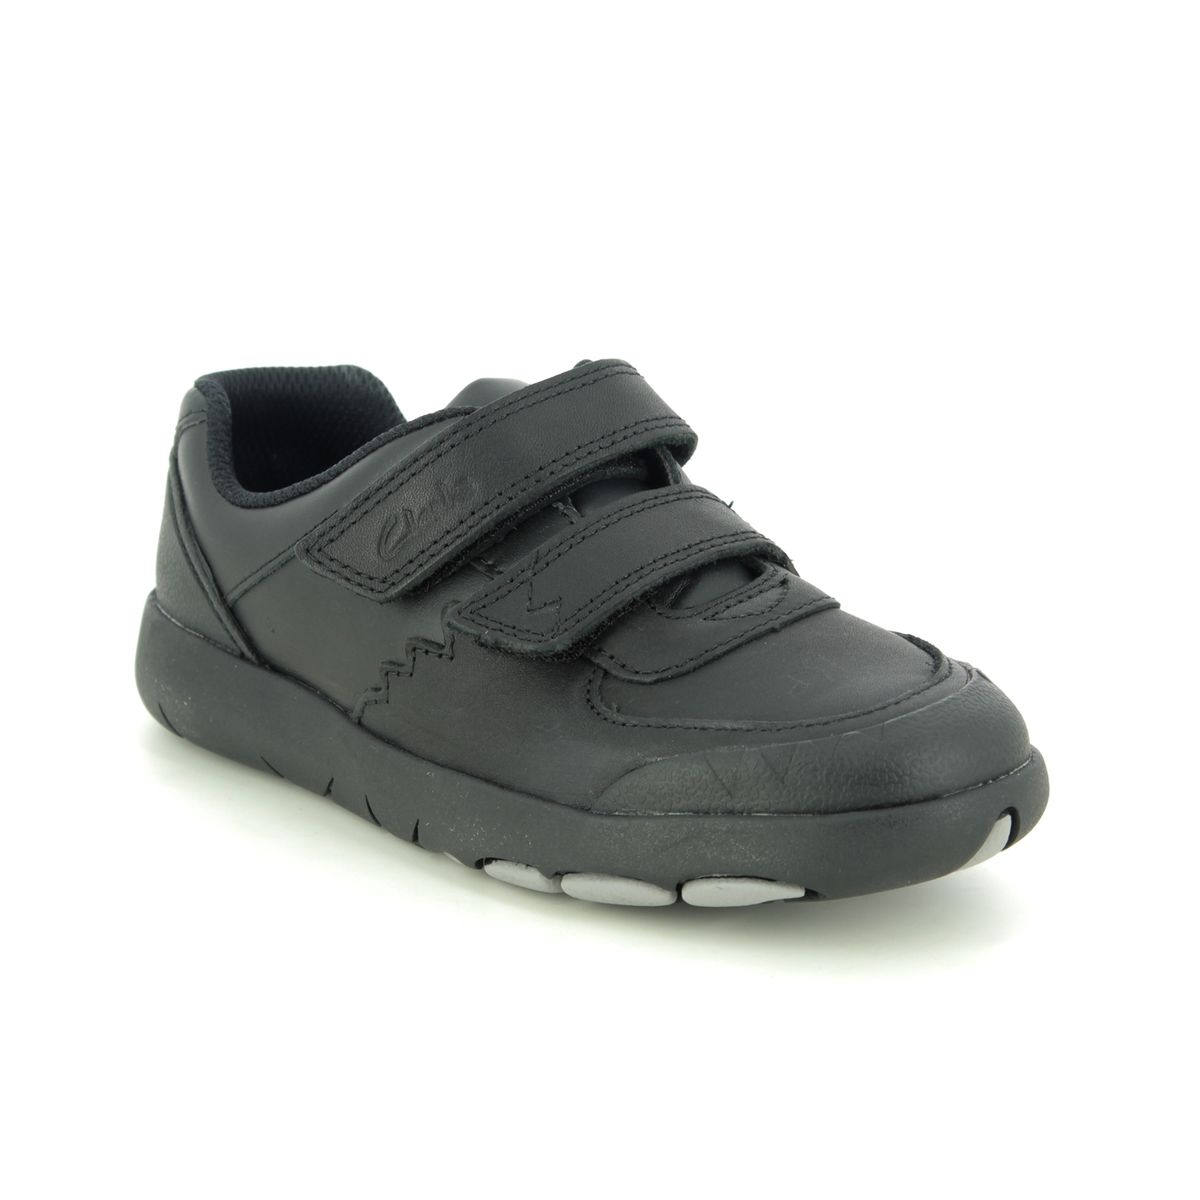 Clarks Rex Pace K Black leather Kids Boys Shoes 4704-48H in a Plain Leather in Size 2.5